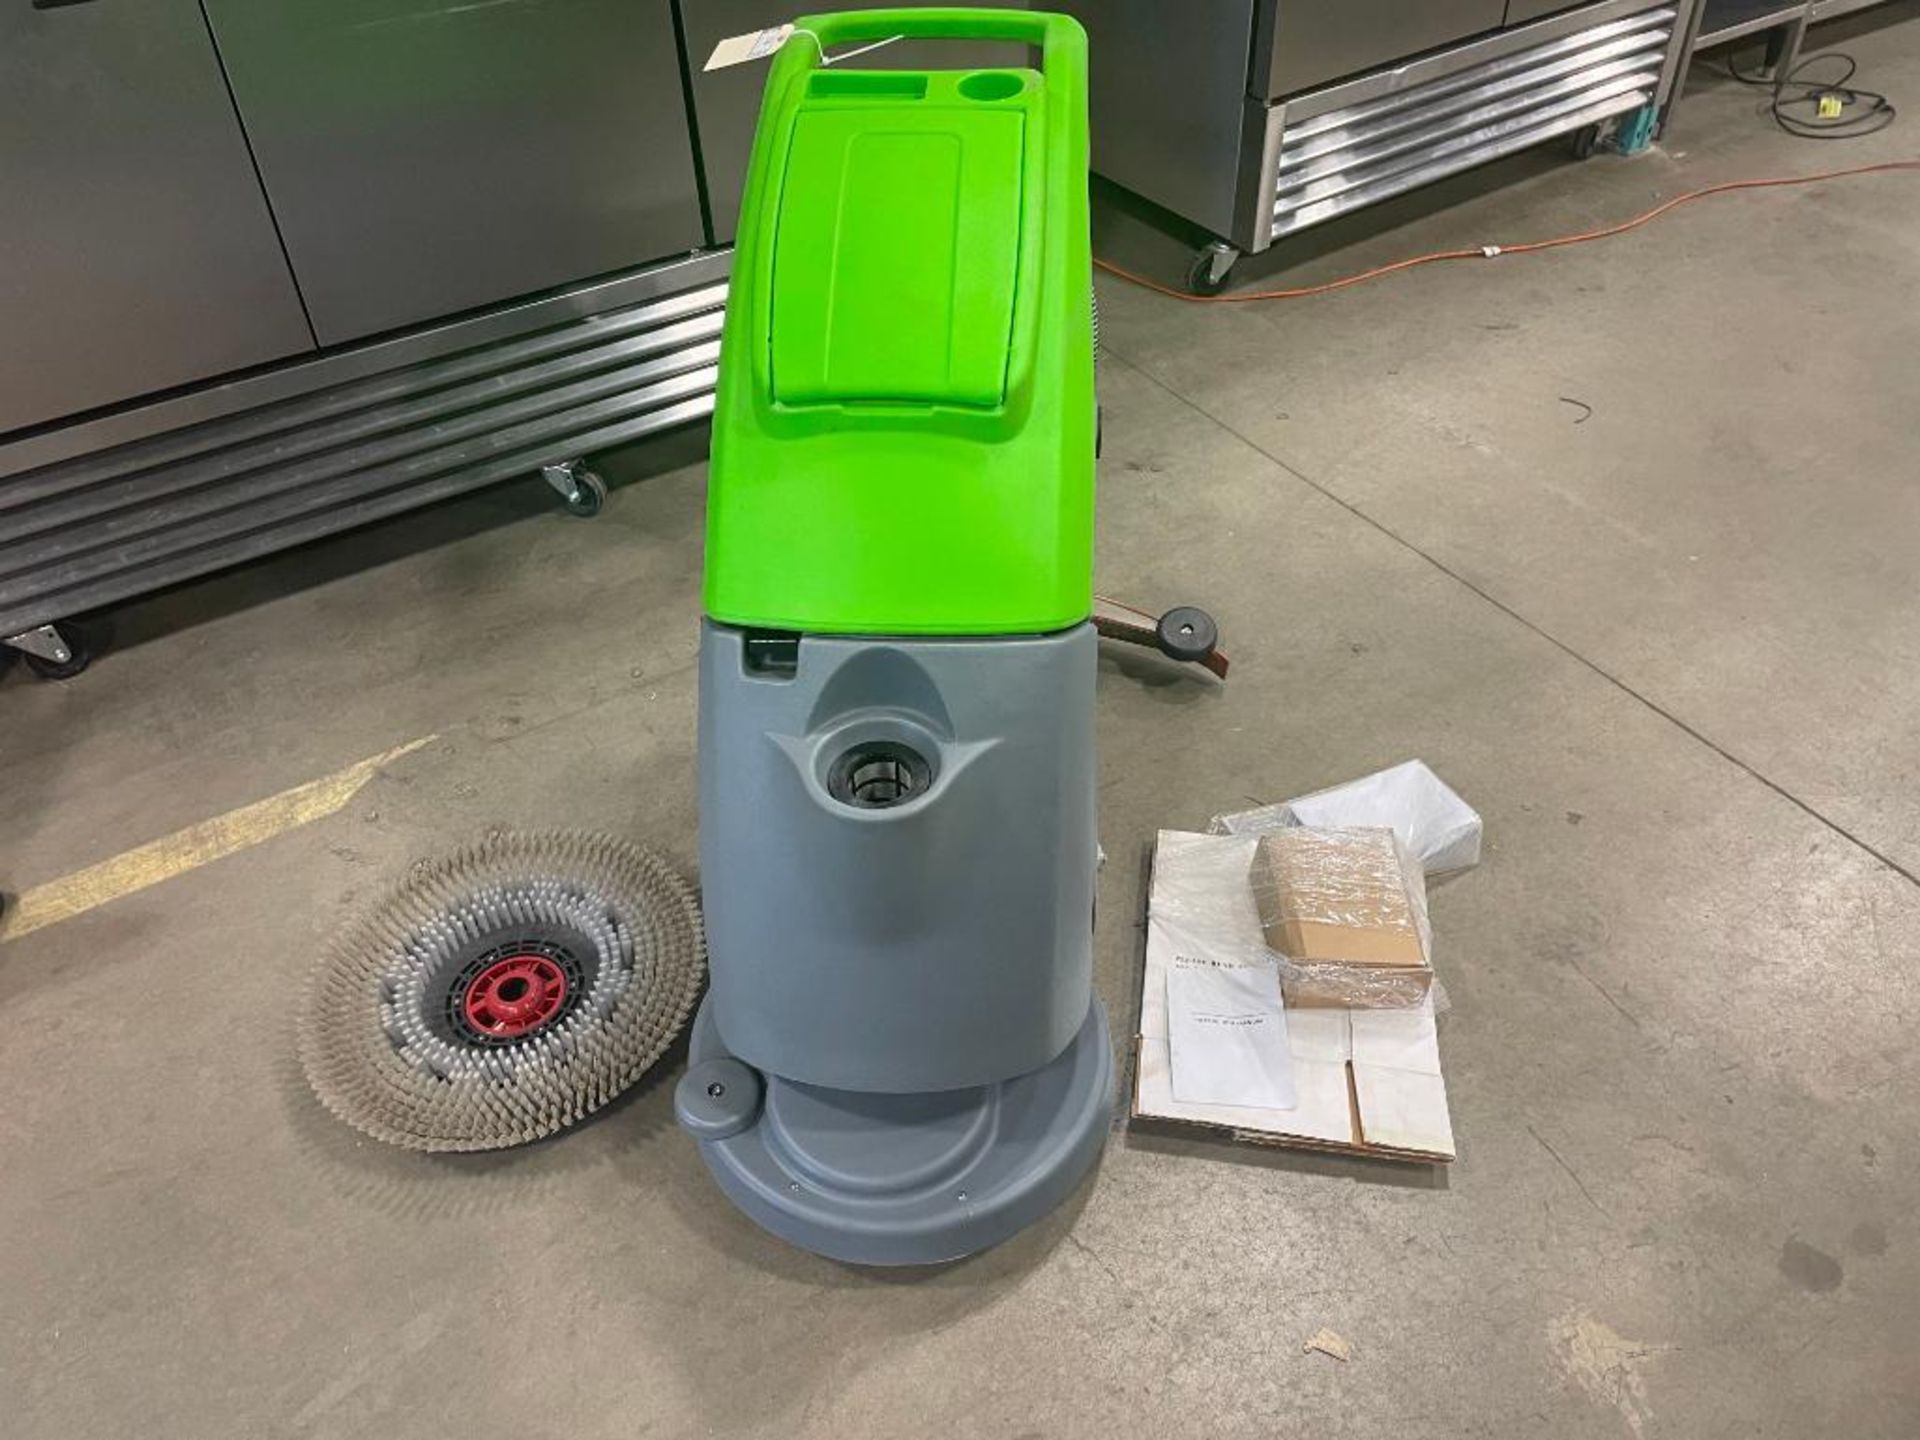 NEW 2022 AOKEQI OK-500 19" WIDE WALK BEHIND ELECTRIC INDUSTRIAL AUTO FLOOR SCRUBBER/DRYER - Image 2 of 9